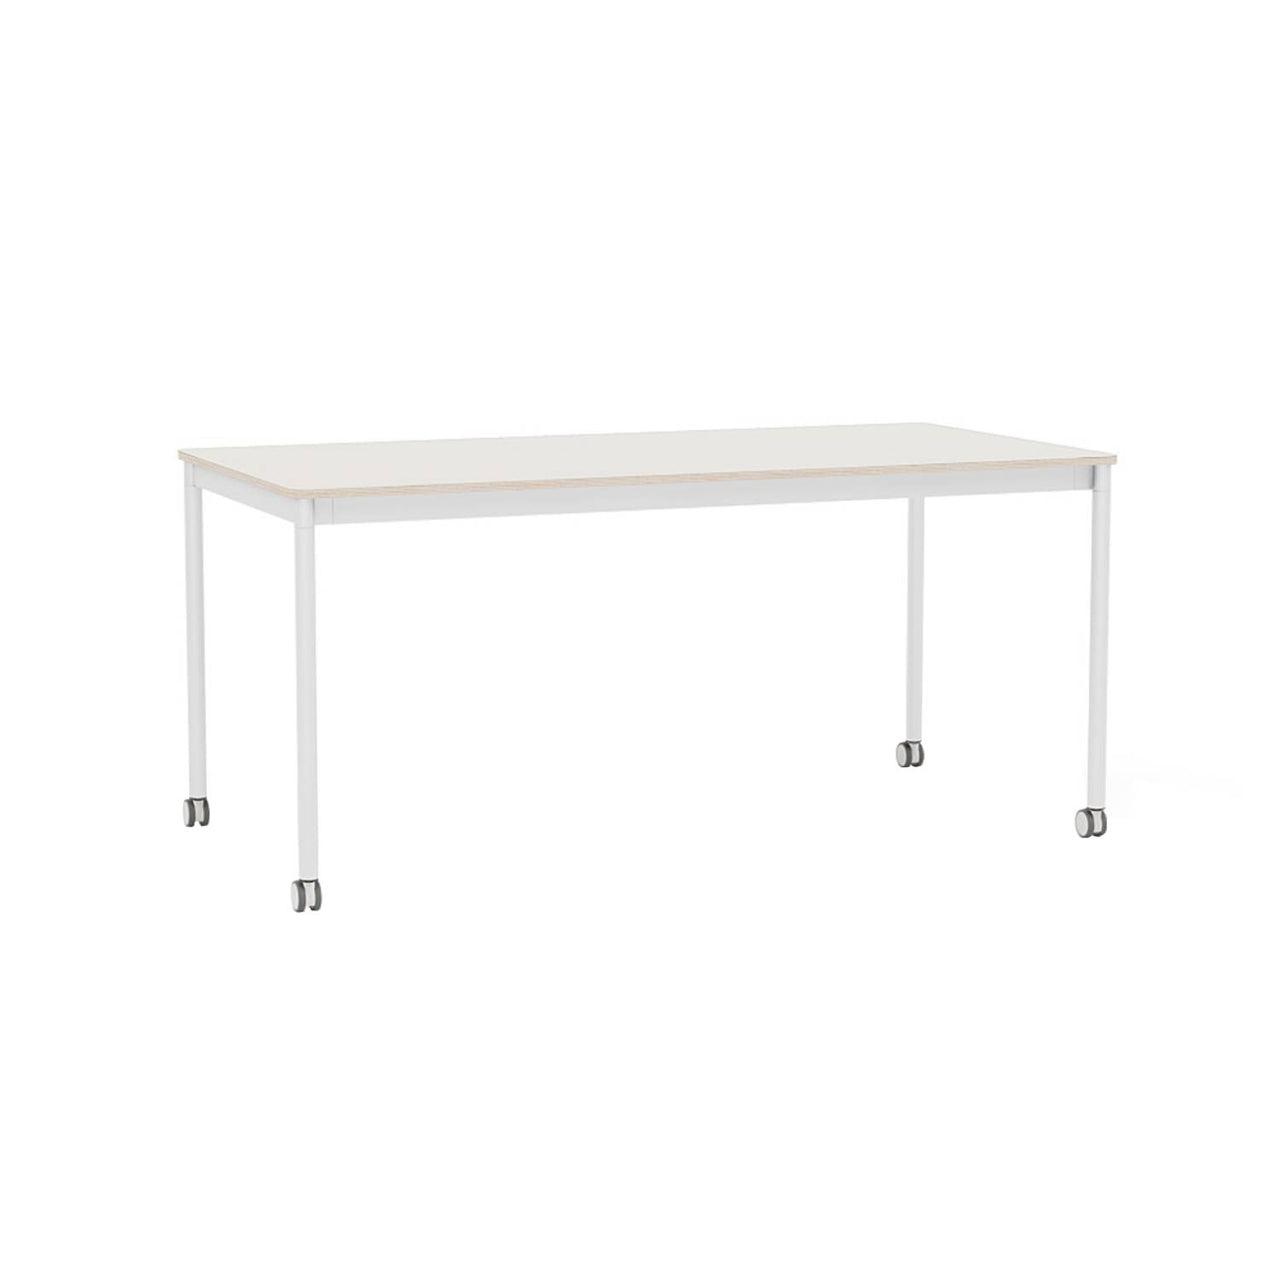 Base Table with Castors: 63